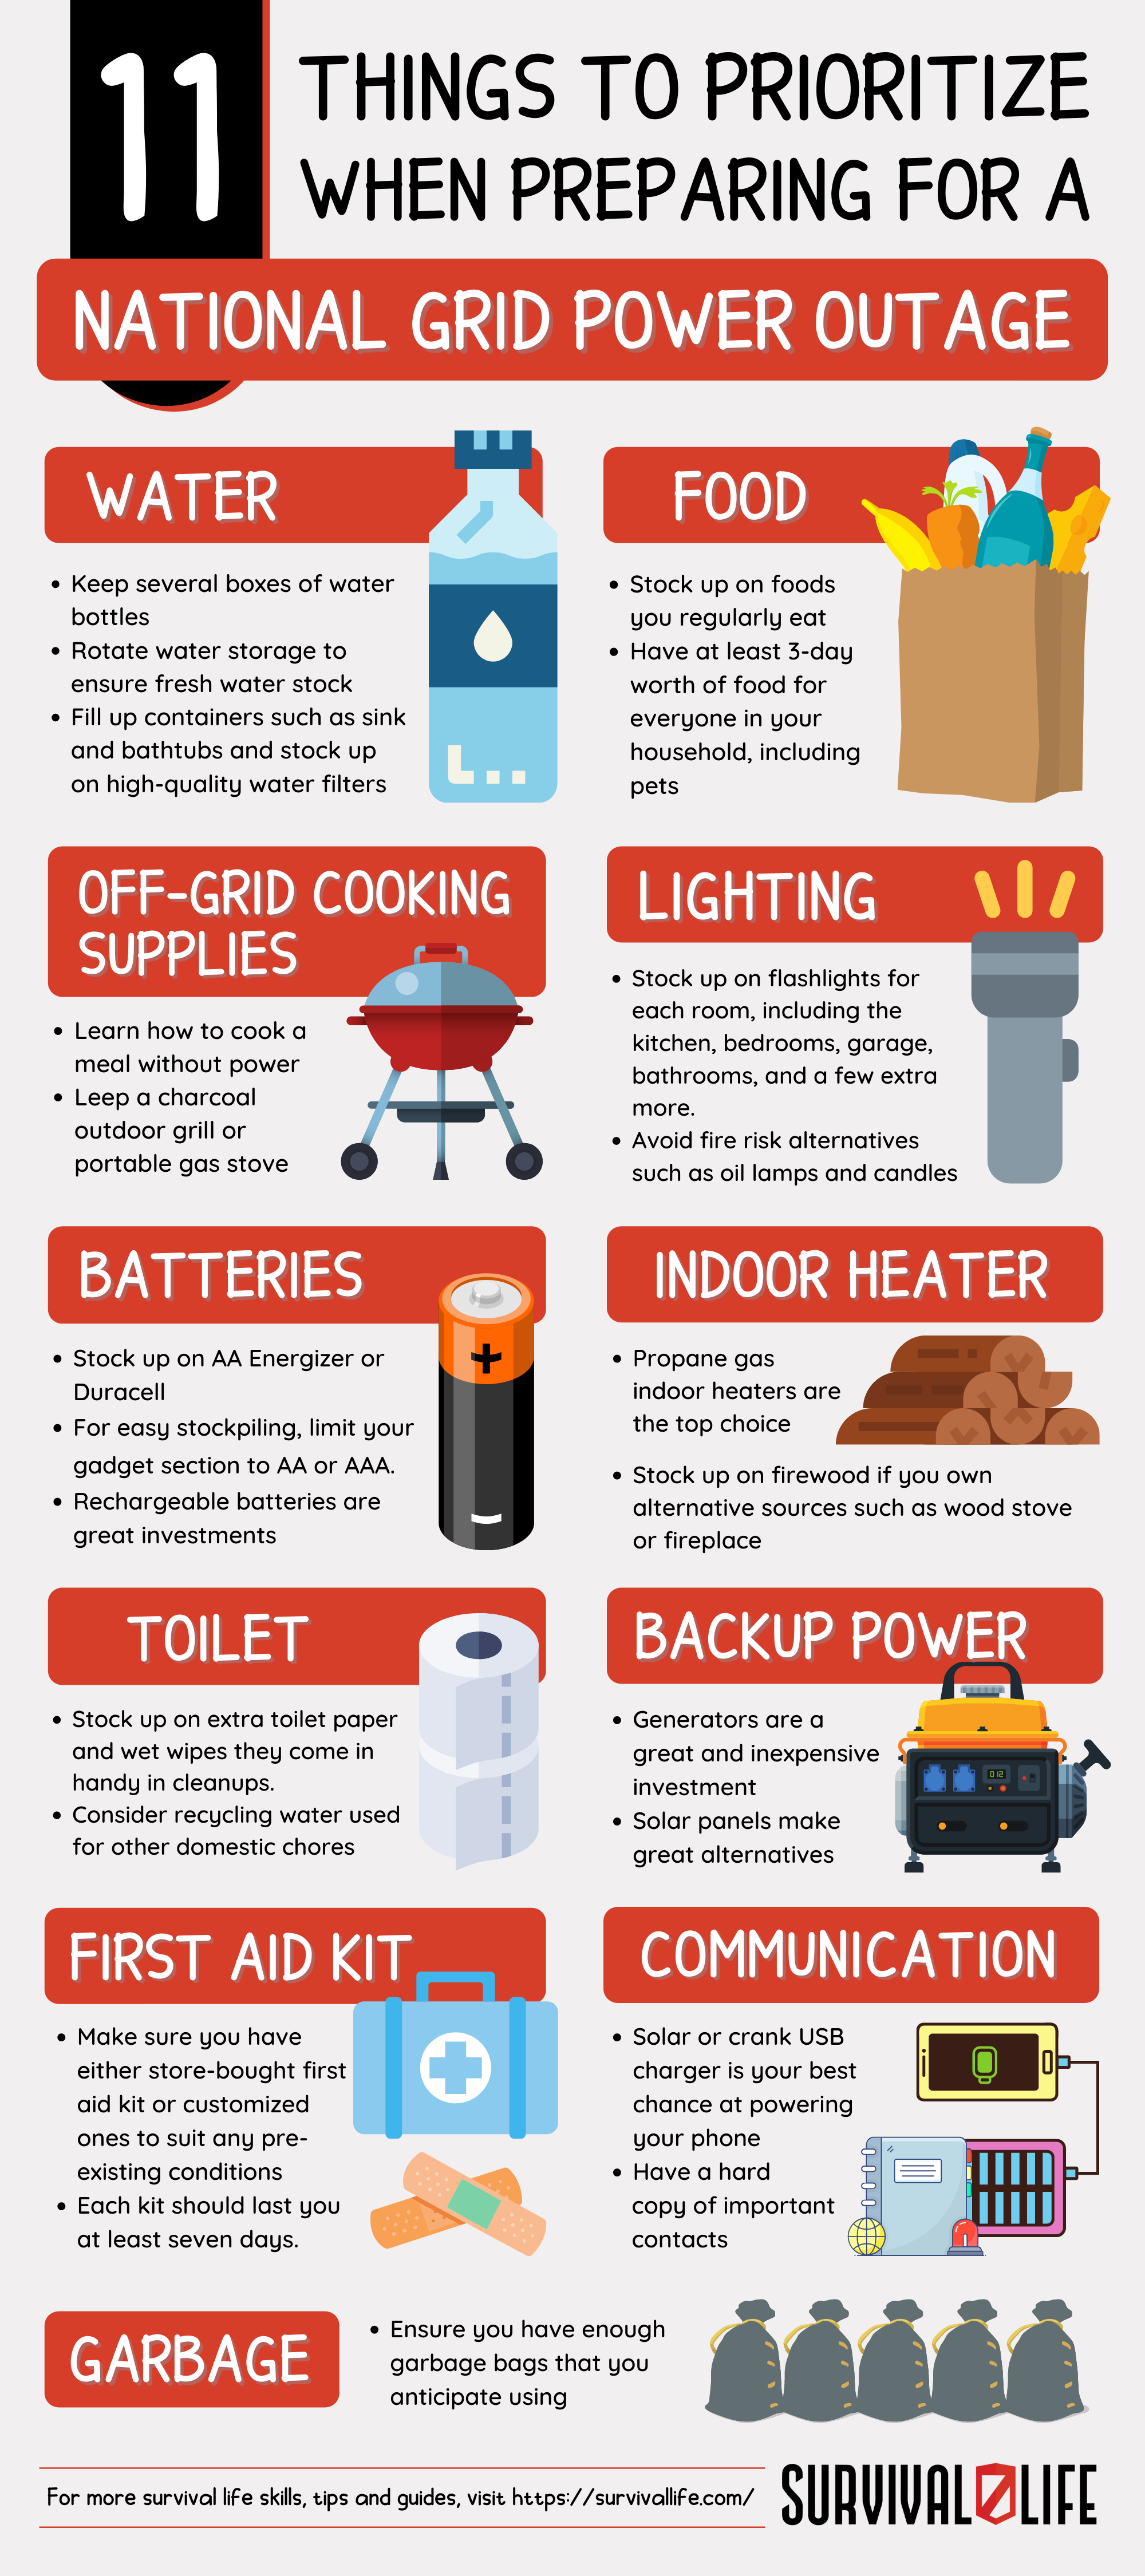 SL - 11 Things to Prioritize When Preparing for a National Grid Power Outage